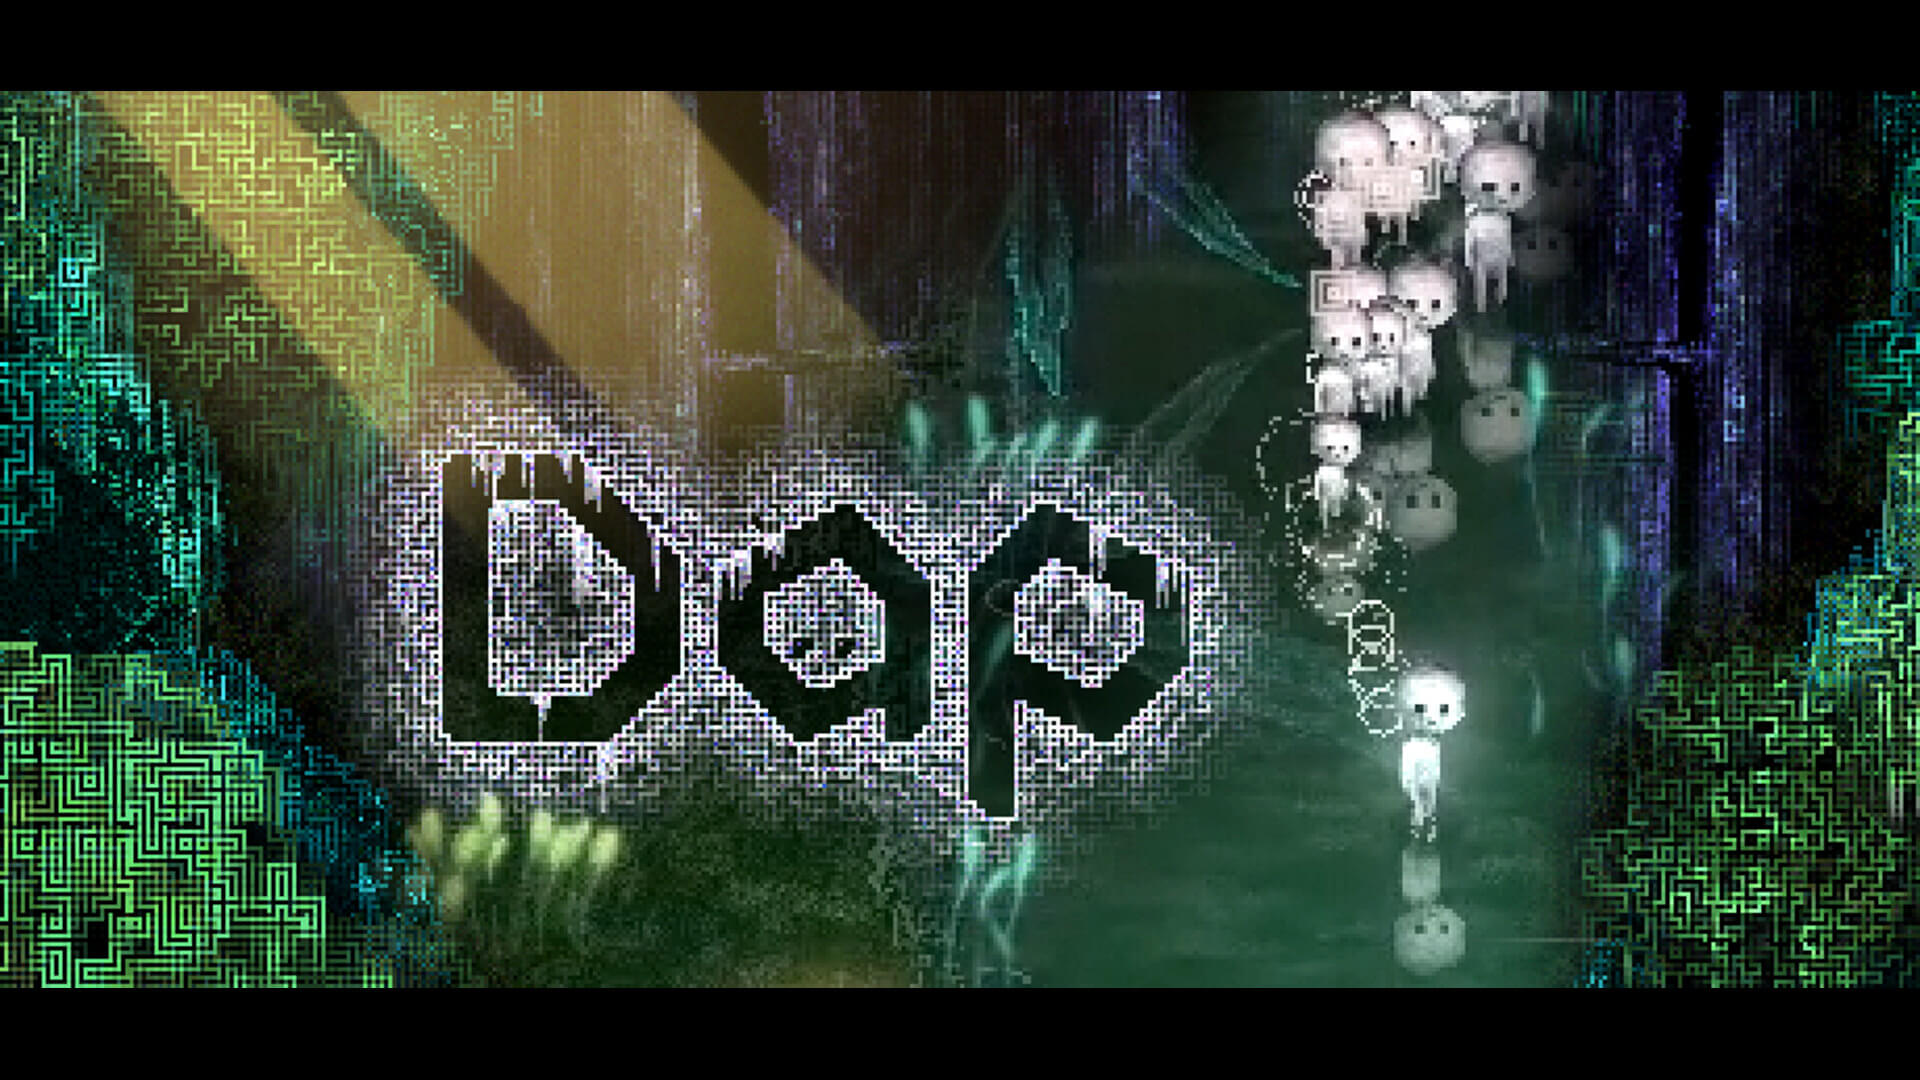 DAP Released Title Image